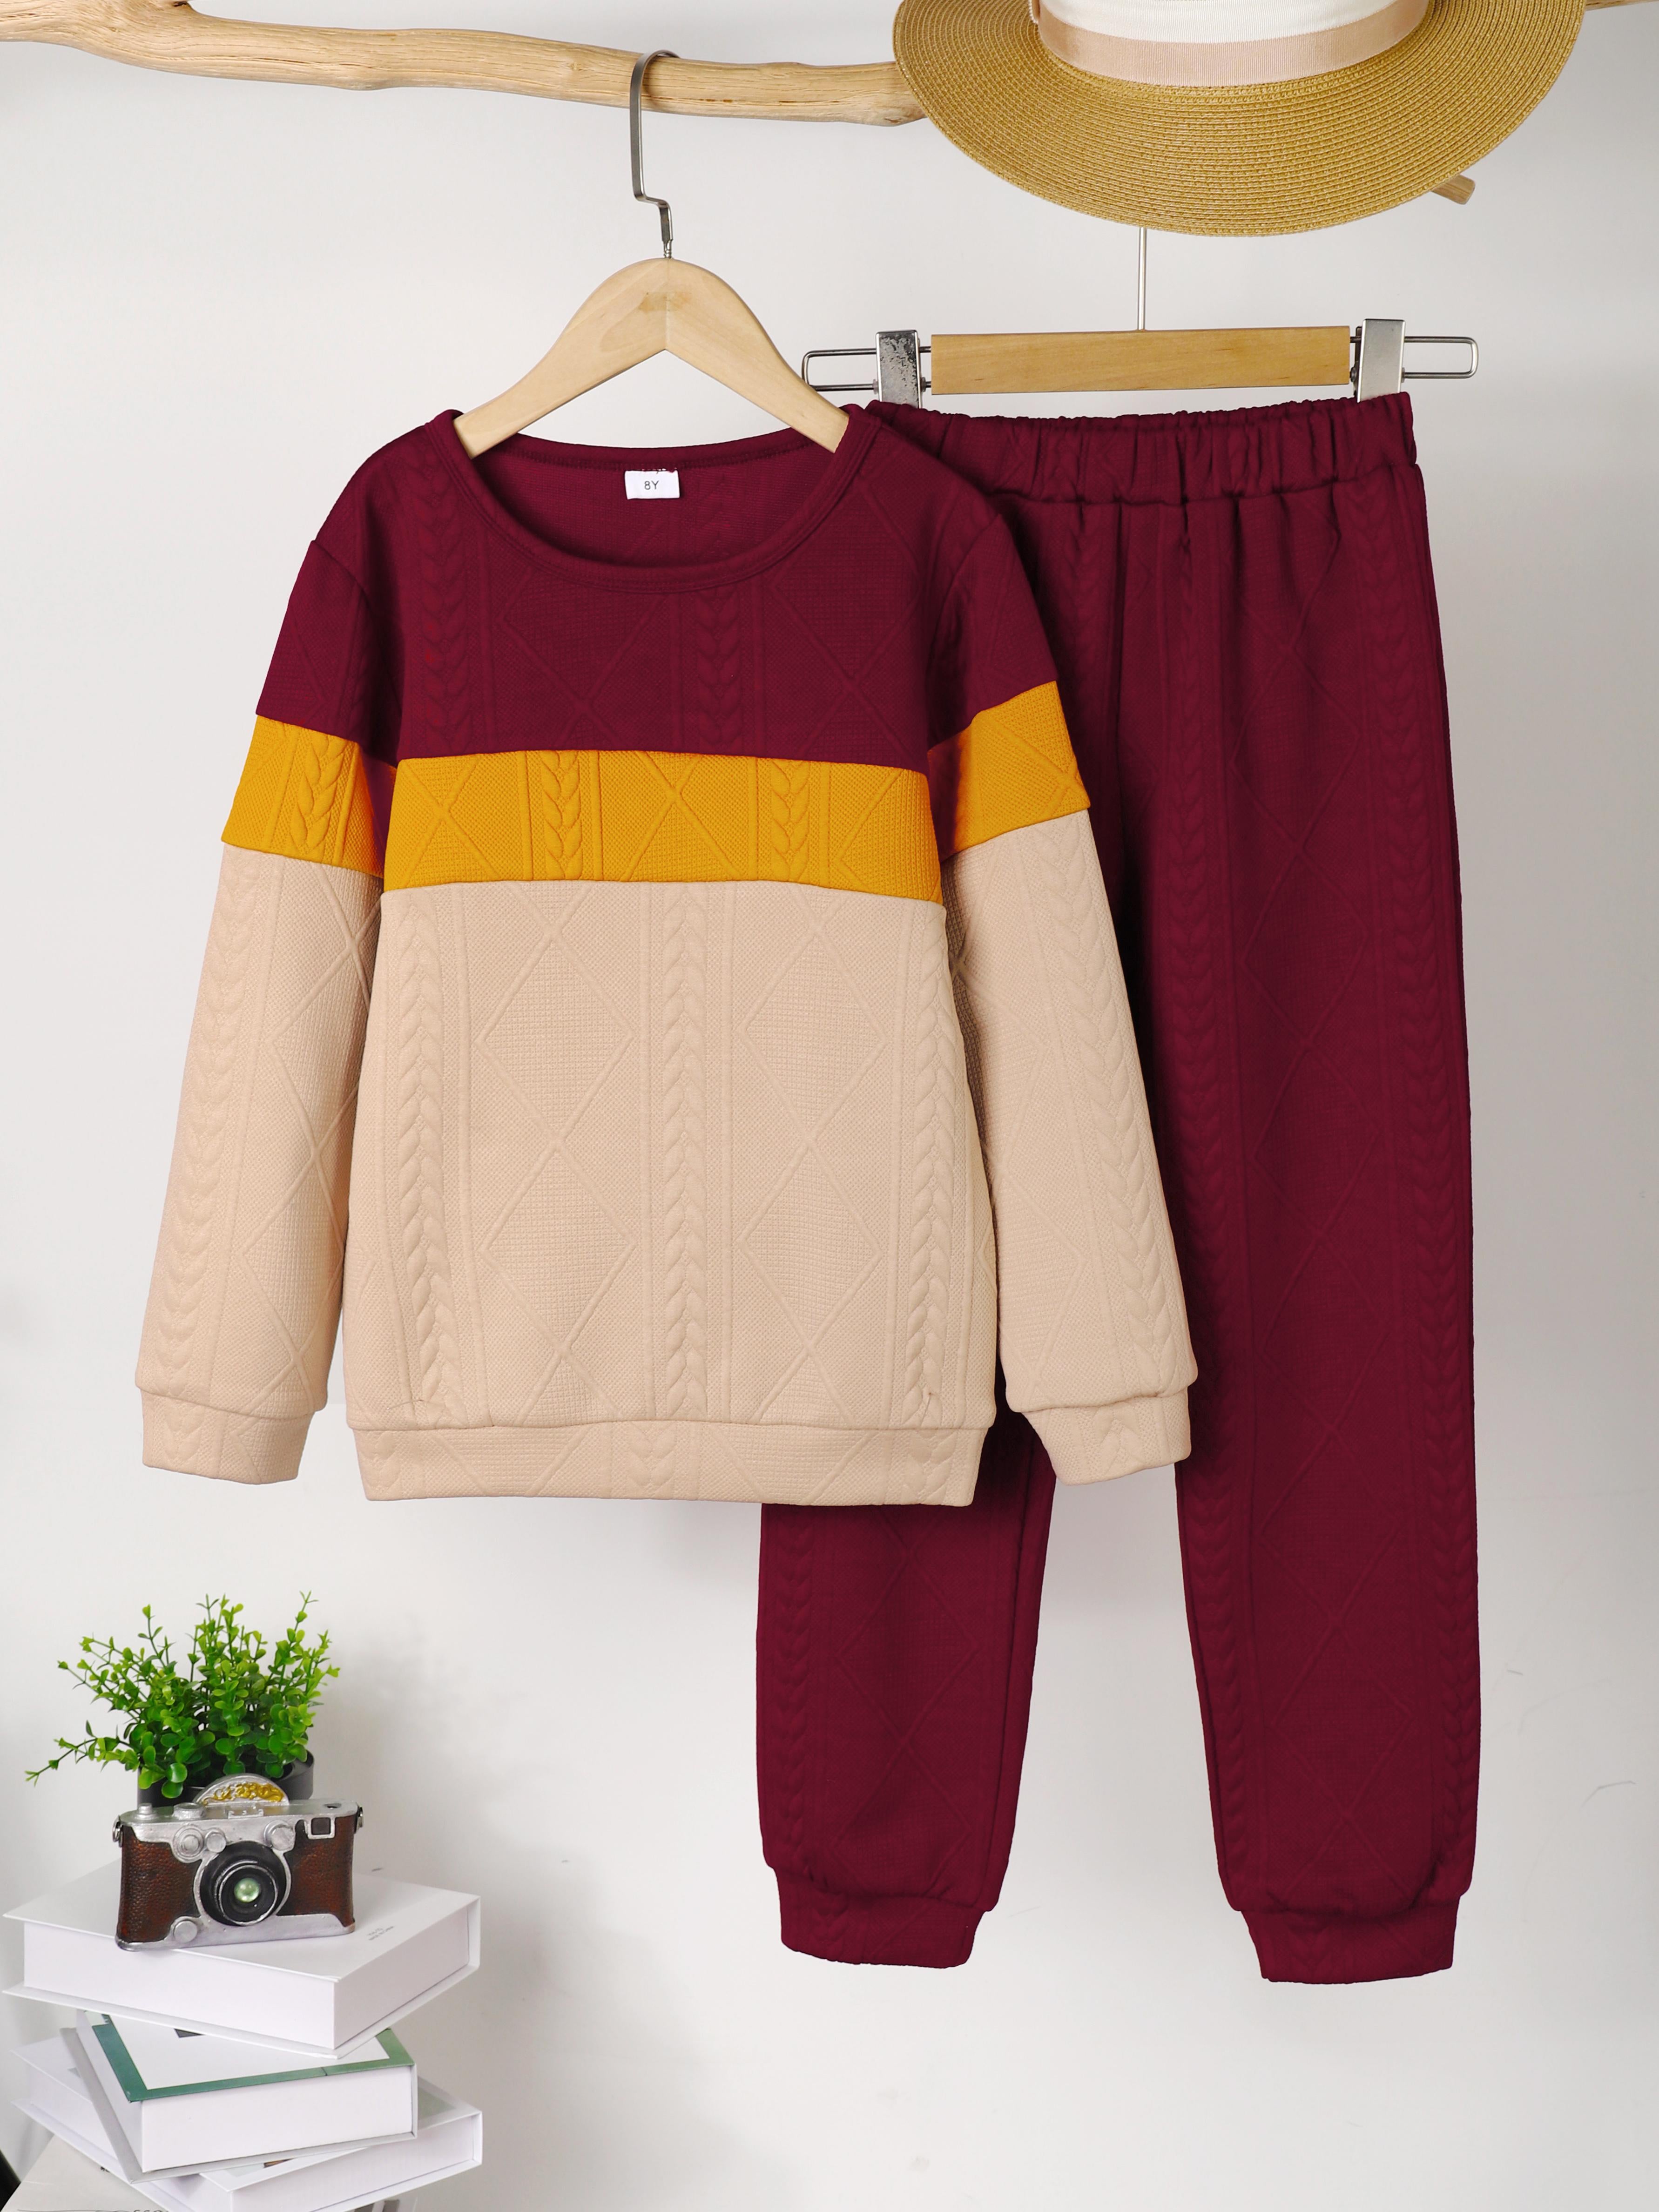 8-14Y Ready Stock Kids Boys Outfits Pants Sets Splice Long Sleeve Sweater For Fall Winter Essential Pants 2Pcs Clothes Set Catpapa 462305012